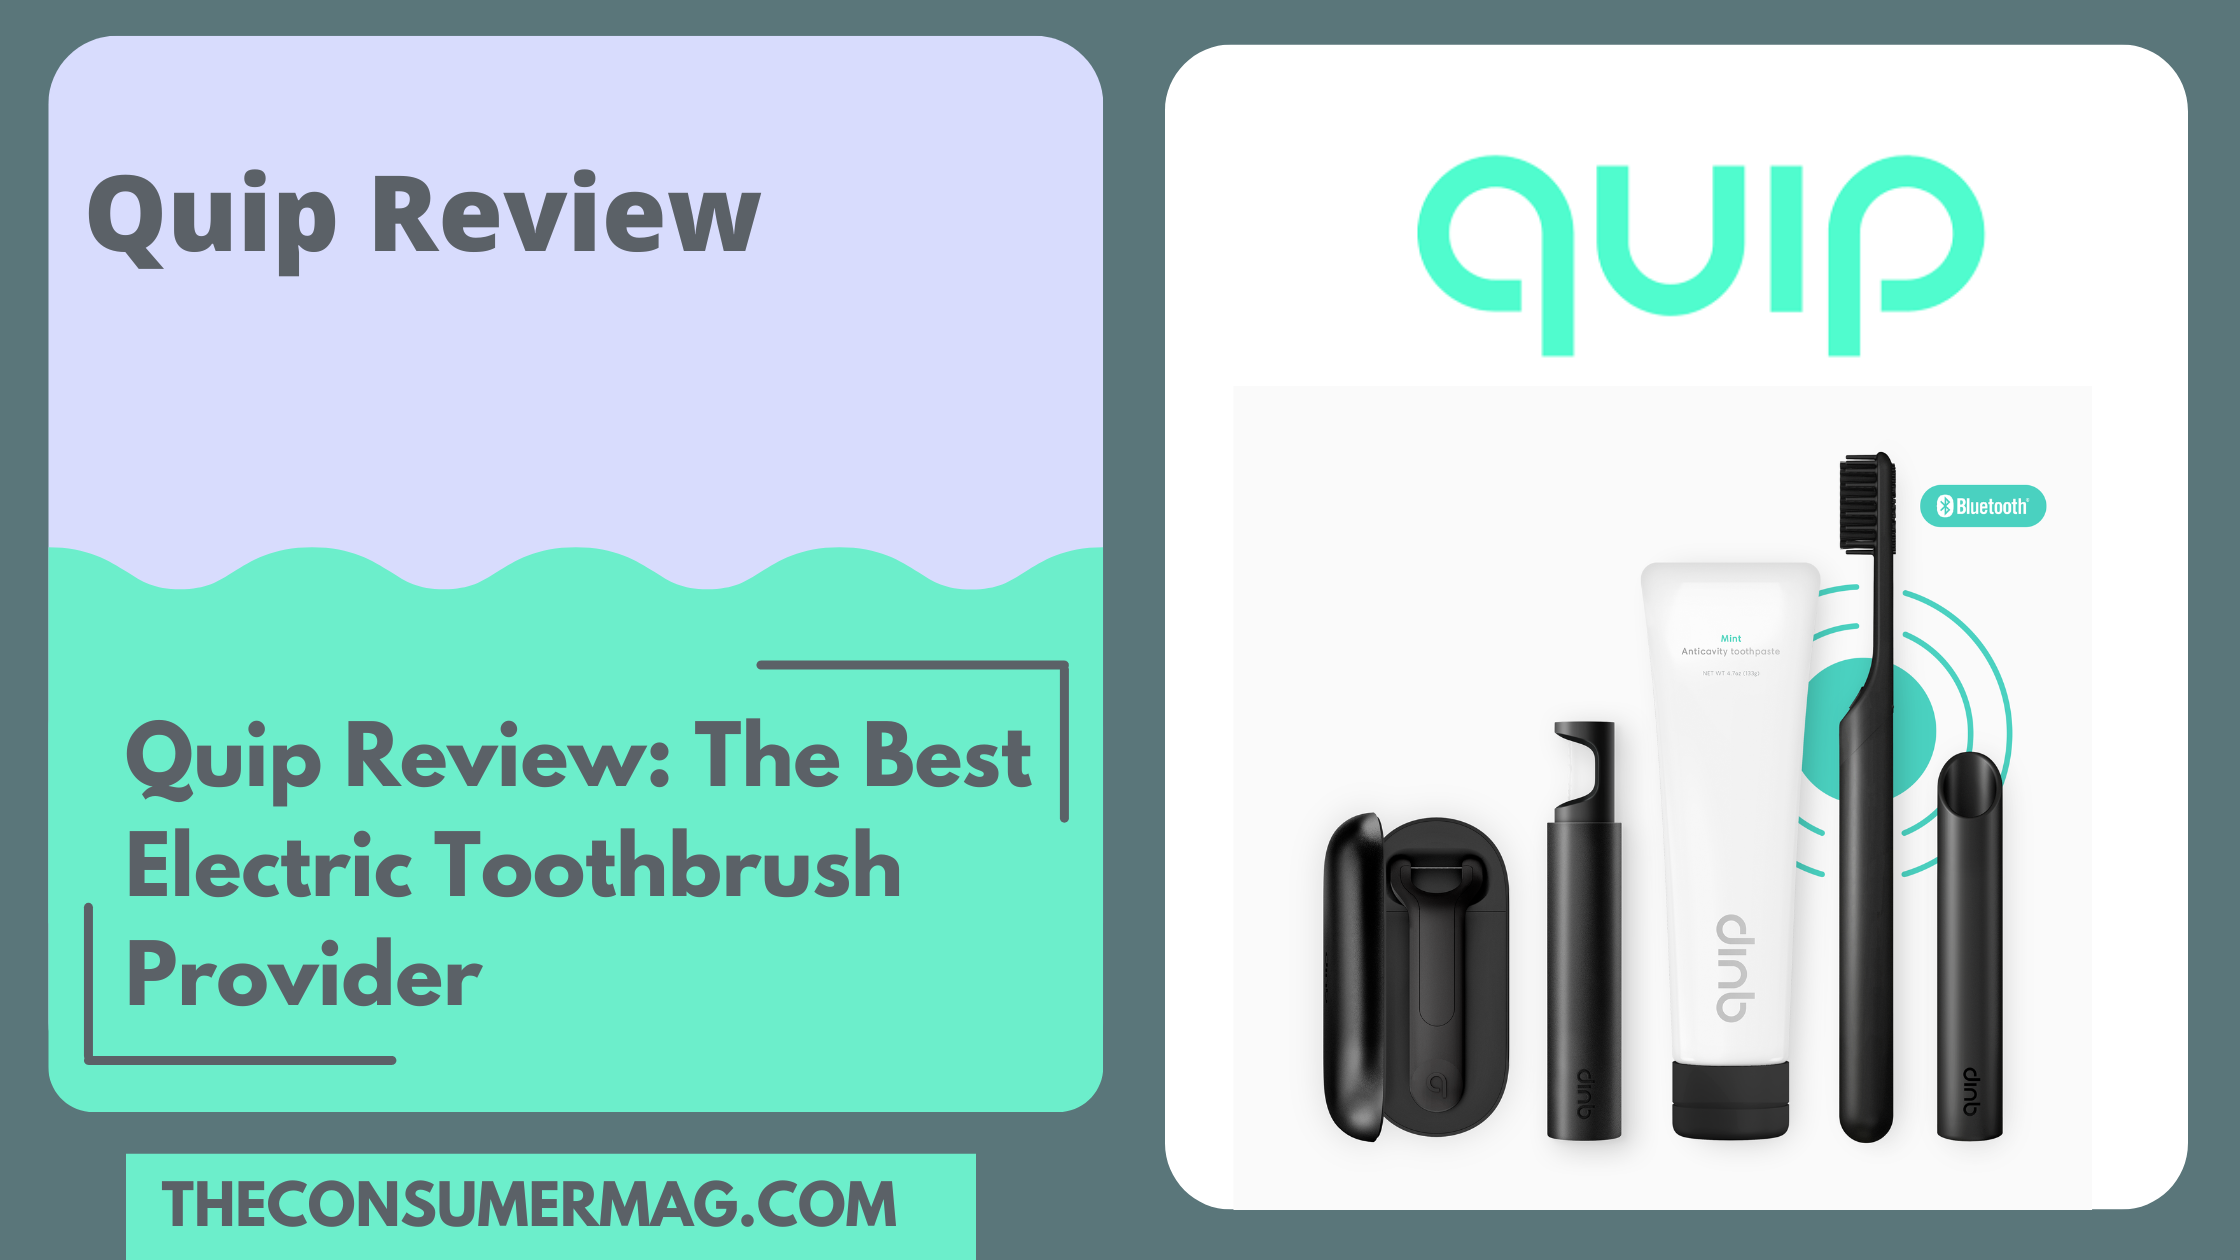 Quip toothbrush featured image